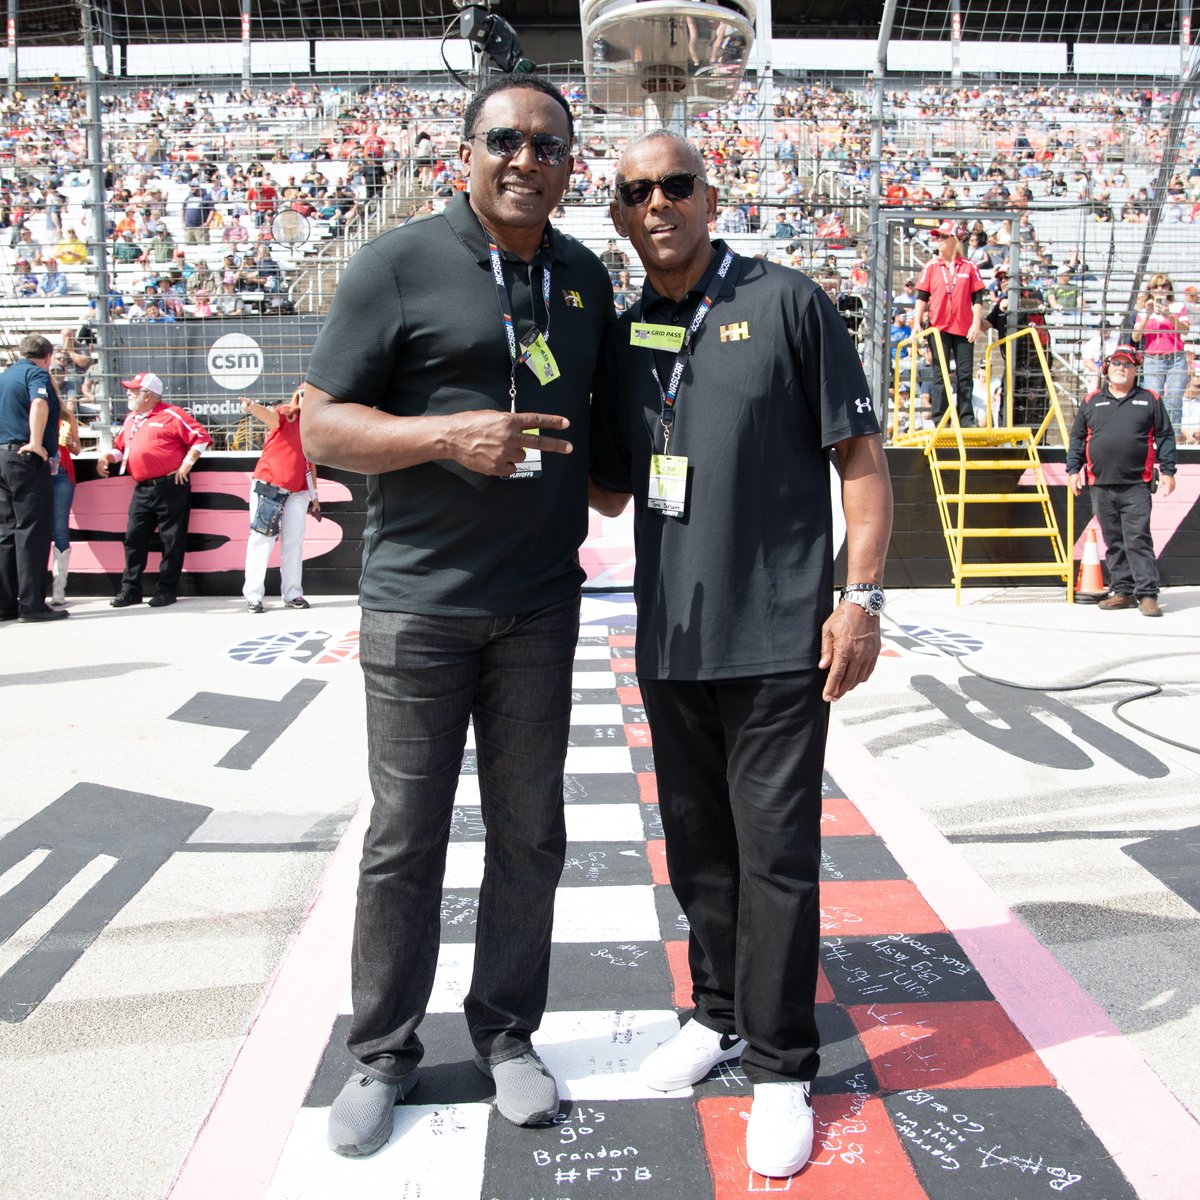 NFL legends @Tony_Dorsett and @81TimBrown spent Sunday at the Texas Motor Speedway to watch the NASCAR Cup Series playoffs! 🏁 @h2hlegends @BubbaWallace